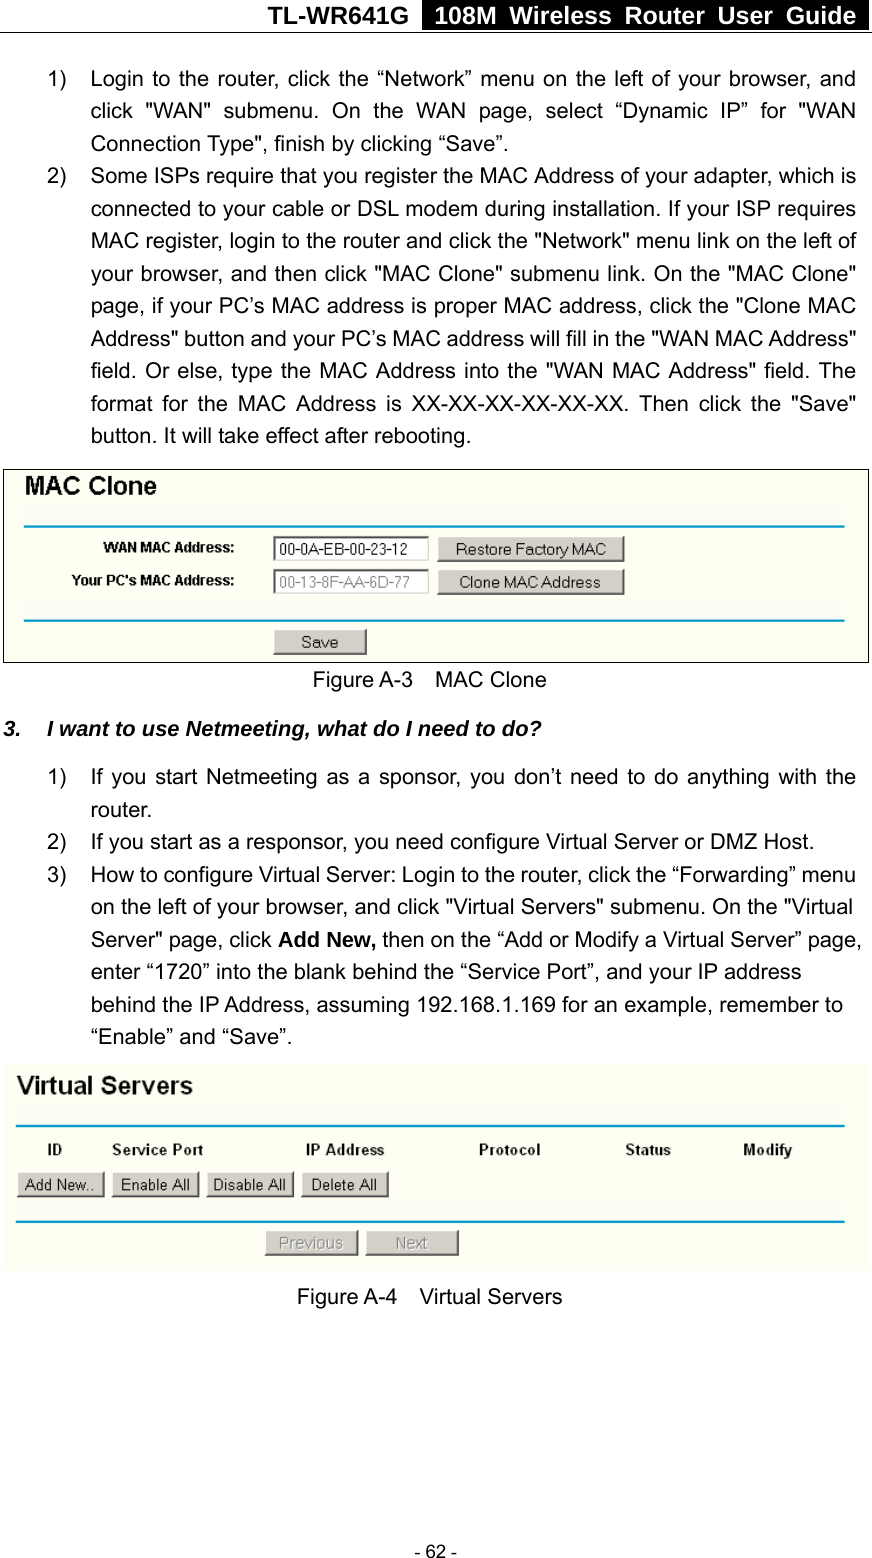 TL-WR641G   108M Wireless Router User Guide  1)  Login to the router, click the “Network” menu on the left of your browser, and click &quot;WAN&quot; submenu. On the WAN page, select “Dynamic IP” for &quot;WAN Connection Type&quot;, finish by clicking “Save”. 2)  Some ISPs require that you register the MAC Address of your adapter, which is connected to your cable or DSL modem during installation. If your ISP requires MAC register, login to the router and click the &quot;Network&quot; menu link on the left of your browser, and then click &quot;MAC Clone&quot; submenu link. On the &quot;MAC Clone&quot; page, if your PC’s MAC address is proper MAC address, click the &quot;Clone MAC Address&quot; button and your PC’s MAC address will fill in the &quot;WAN MAC Address&quot; field. Or else, type the MAC Address into the &quot;WAN MAC Address&quot; field. The format for the MAC Address is XX-XX-XX-XX-XX-XX. Then click the &quot;Save&quot; button. It will take effect after rebooting.  Figure A-3  MAC Clone 3.  I want to use Netmeeting, what do I need to do? 1)  If you start Netmeeting as a sponsor, you don’t need to do anything with the router. 2)  If you start as a responsor, you need configure Virtual Server or DMZ Host. 3)  How to configure Virtual Server: Login to the router, click the “Forwarding” menu on the left of your browser, and click &quot;Virtual Servers&quot; submenu. On the &quot;Virtual Server&quot; page, click Add New, then on the “Add or Modify a Virtual Server” page,   enter “1720” into the blank behind the “Service Port”, and your IP address behind the IP Address, assuming 192.168.1.169 for an example, remember to “Enable” and “Save”.  Figure A-4  Virtual Servers  - 62 - 